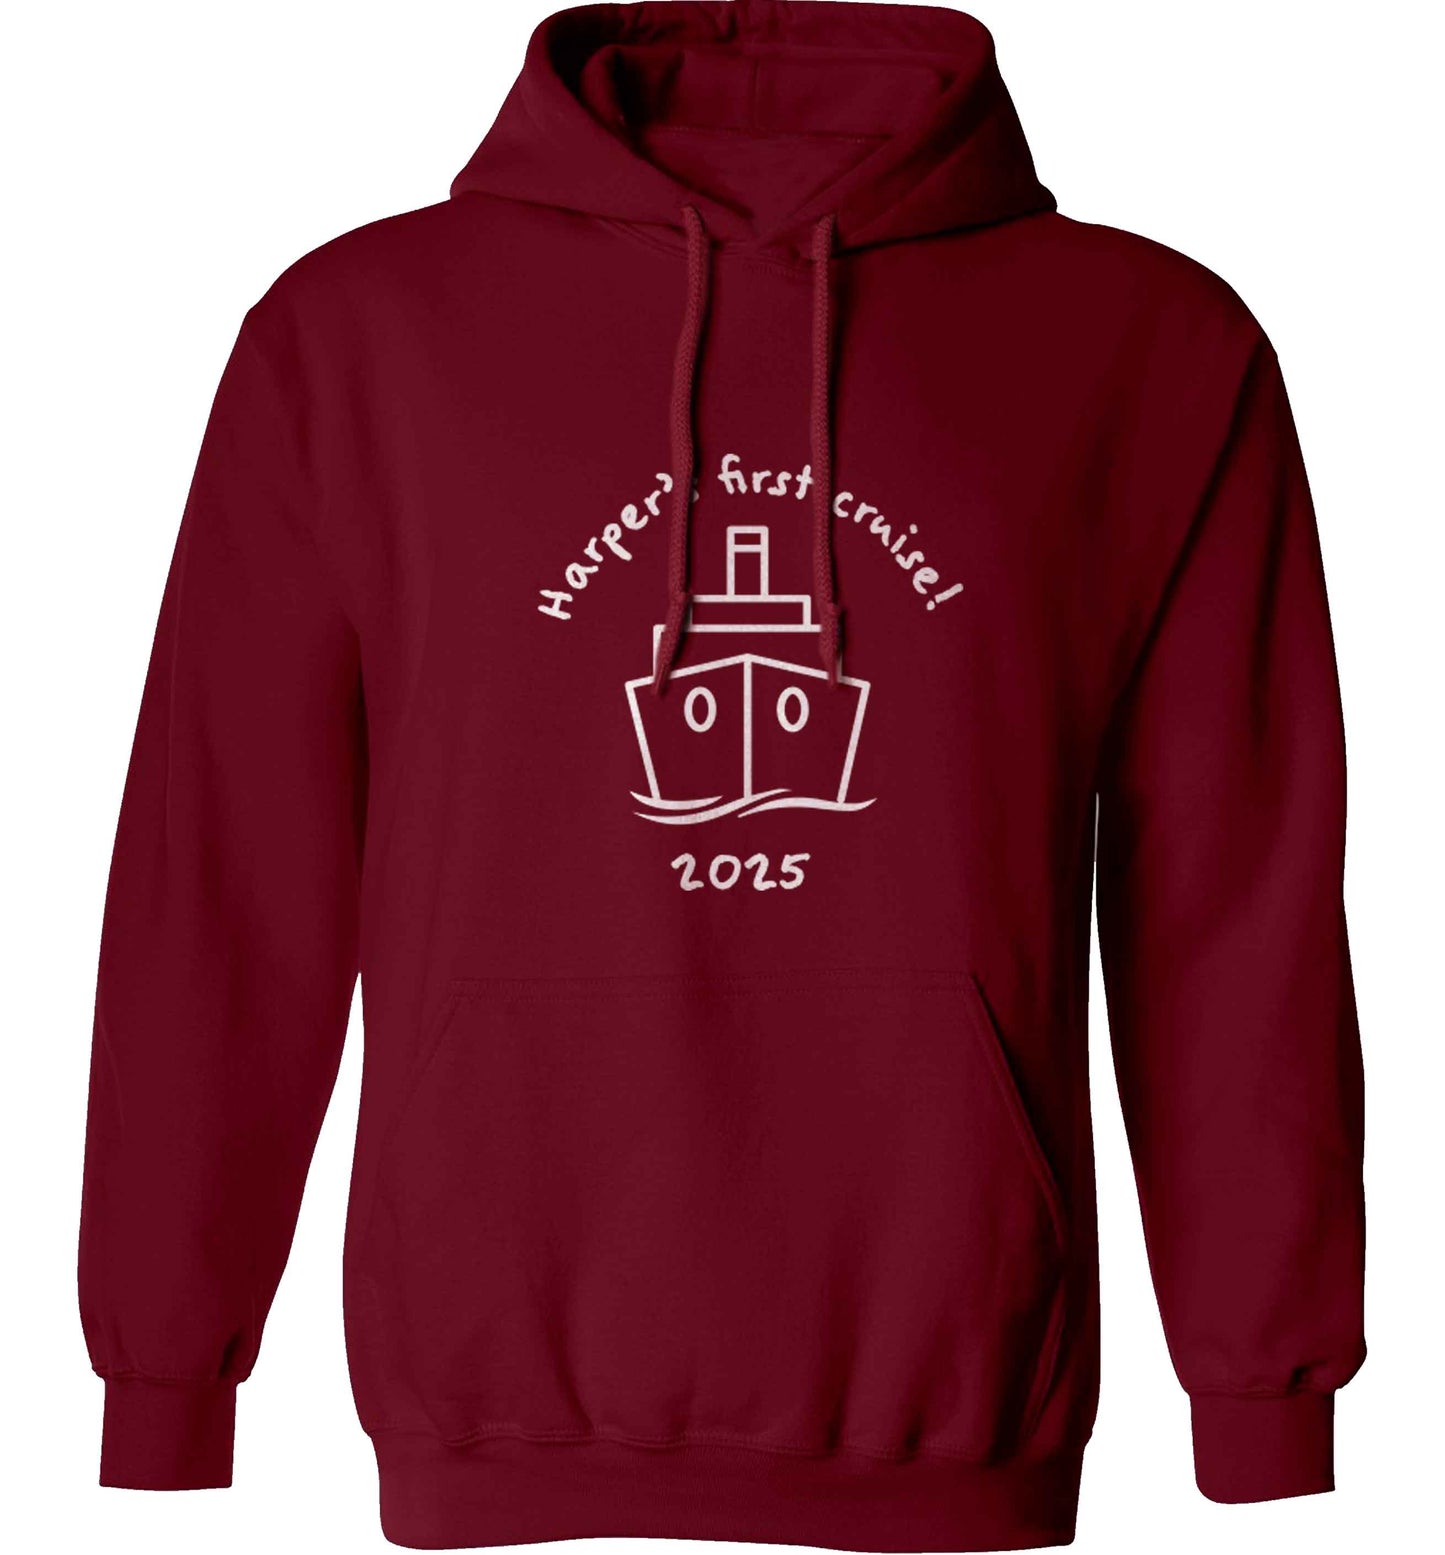 Personalised first cruise adults unisex maroon hoodie 2XL